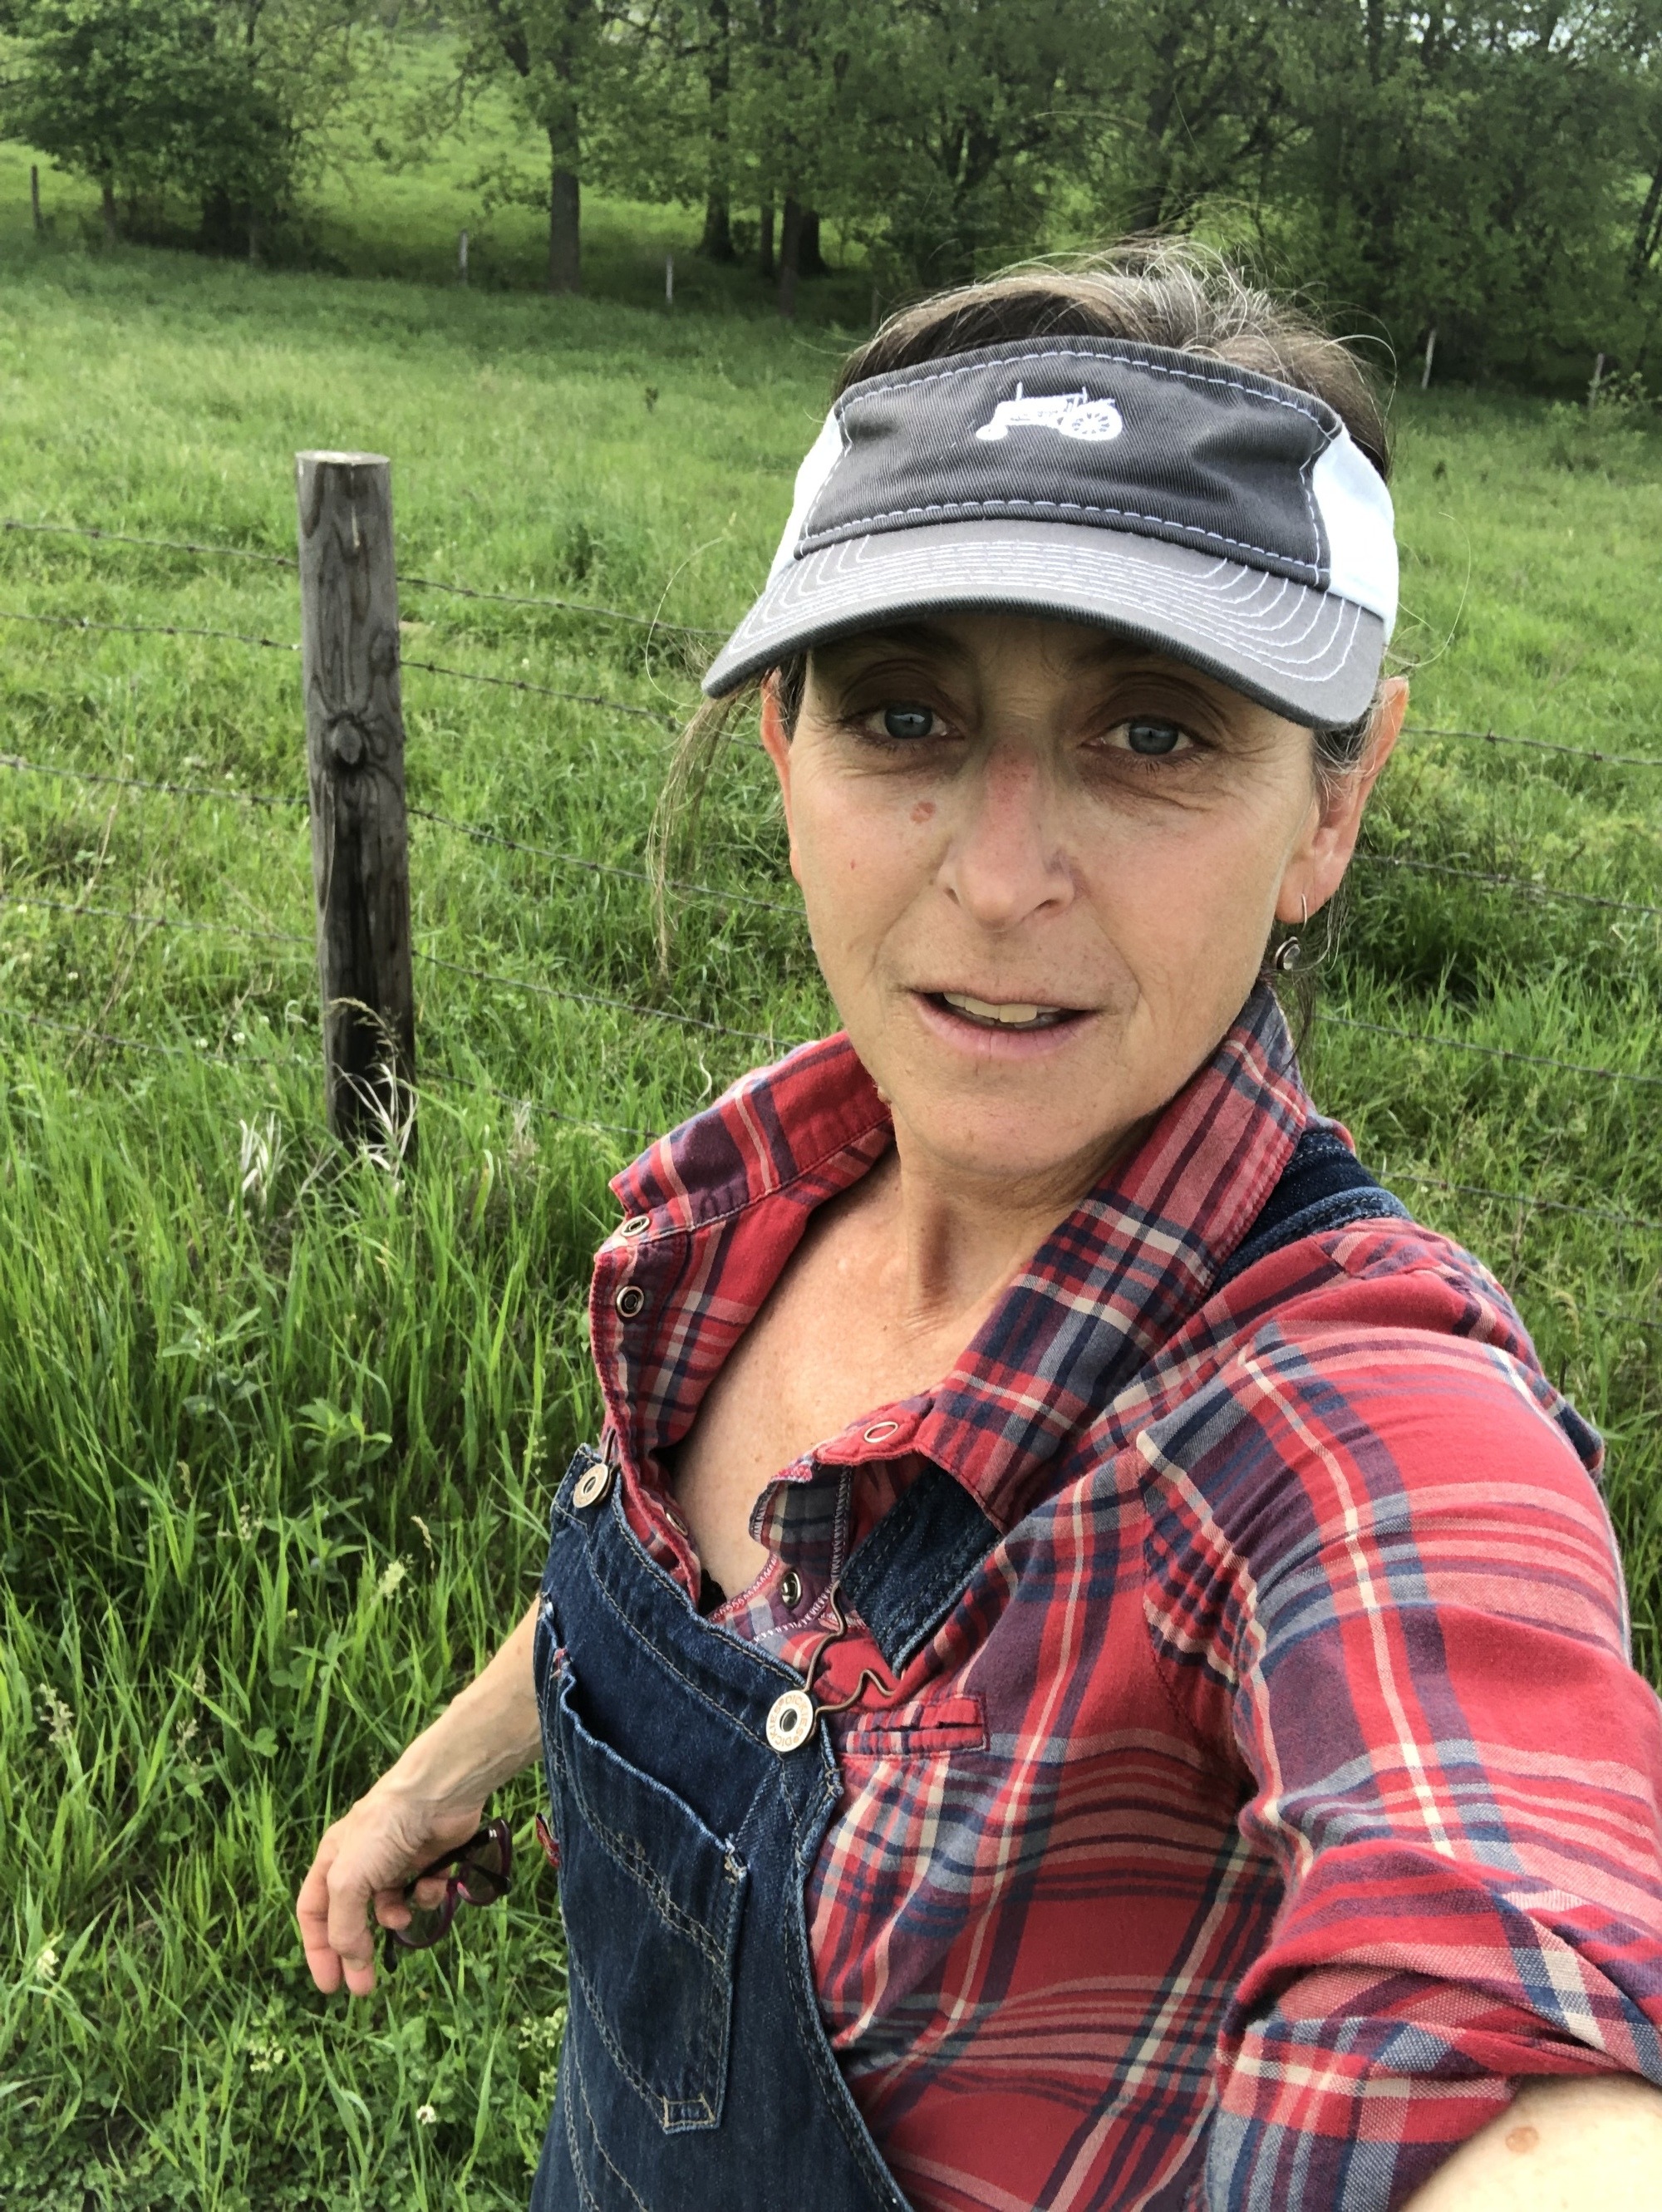 Beth Hoffman takes a selfie while in overalls next to a green field and a barbed wire fence. November 2021